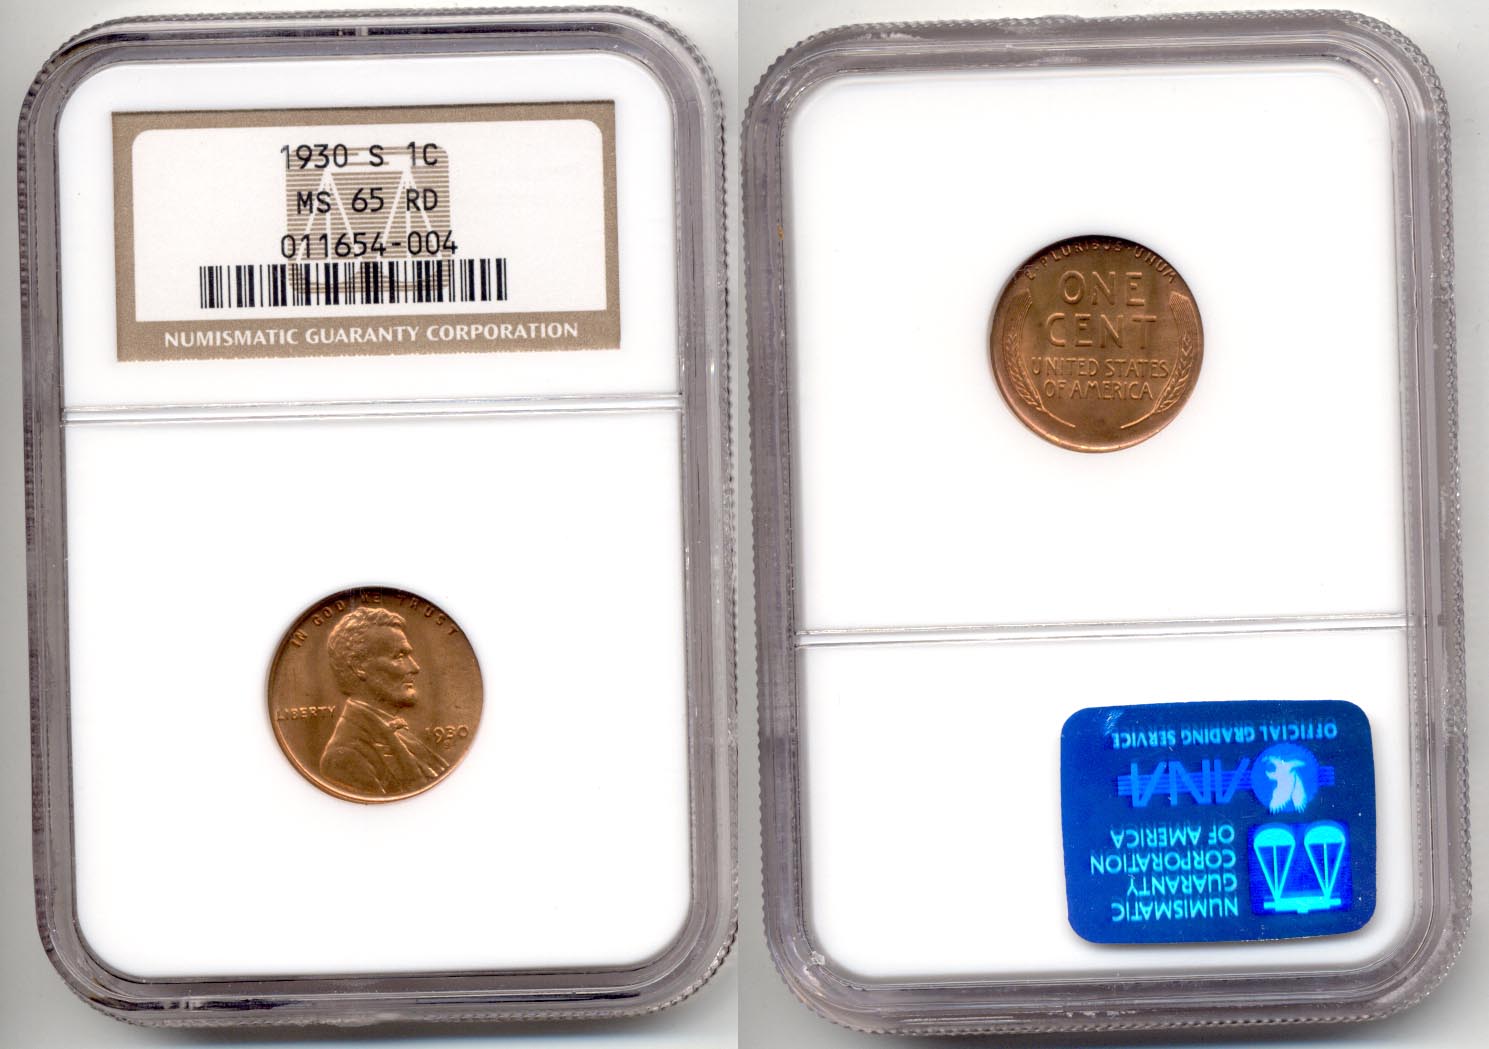 1930-S Lincoln Cent NGC MS-65 Red